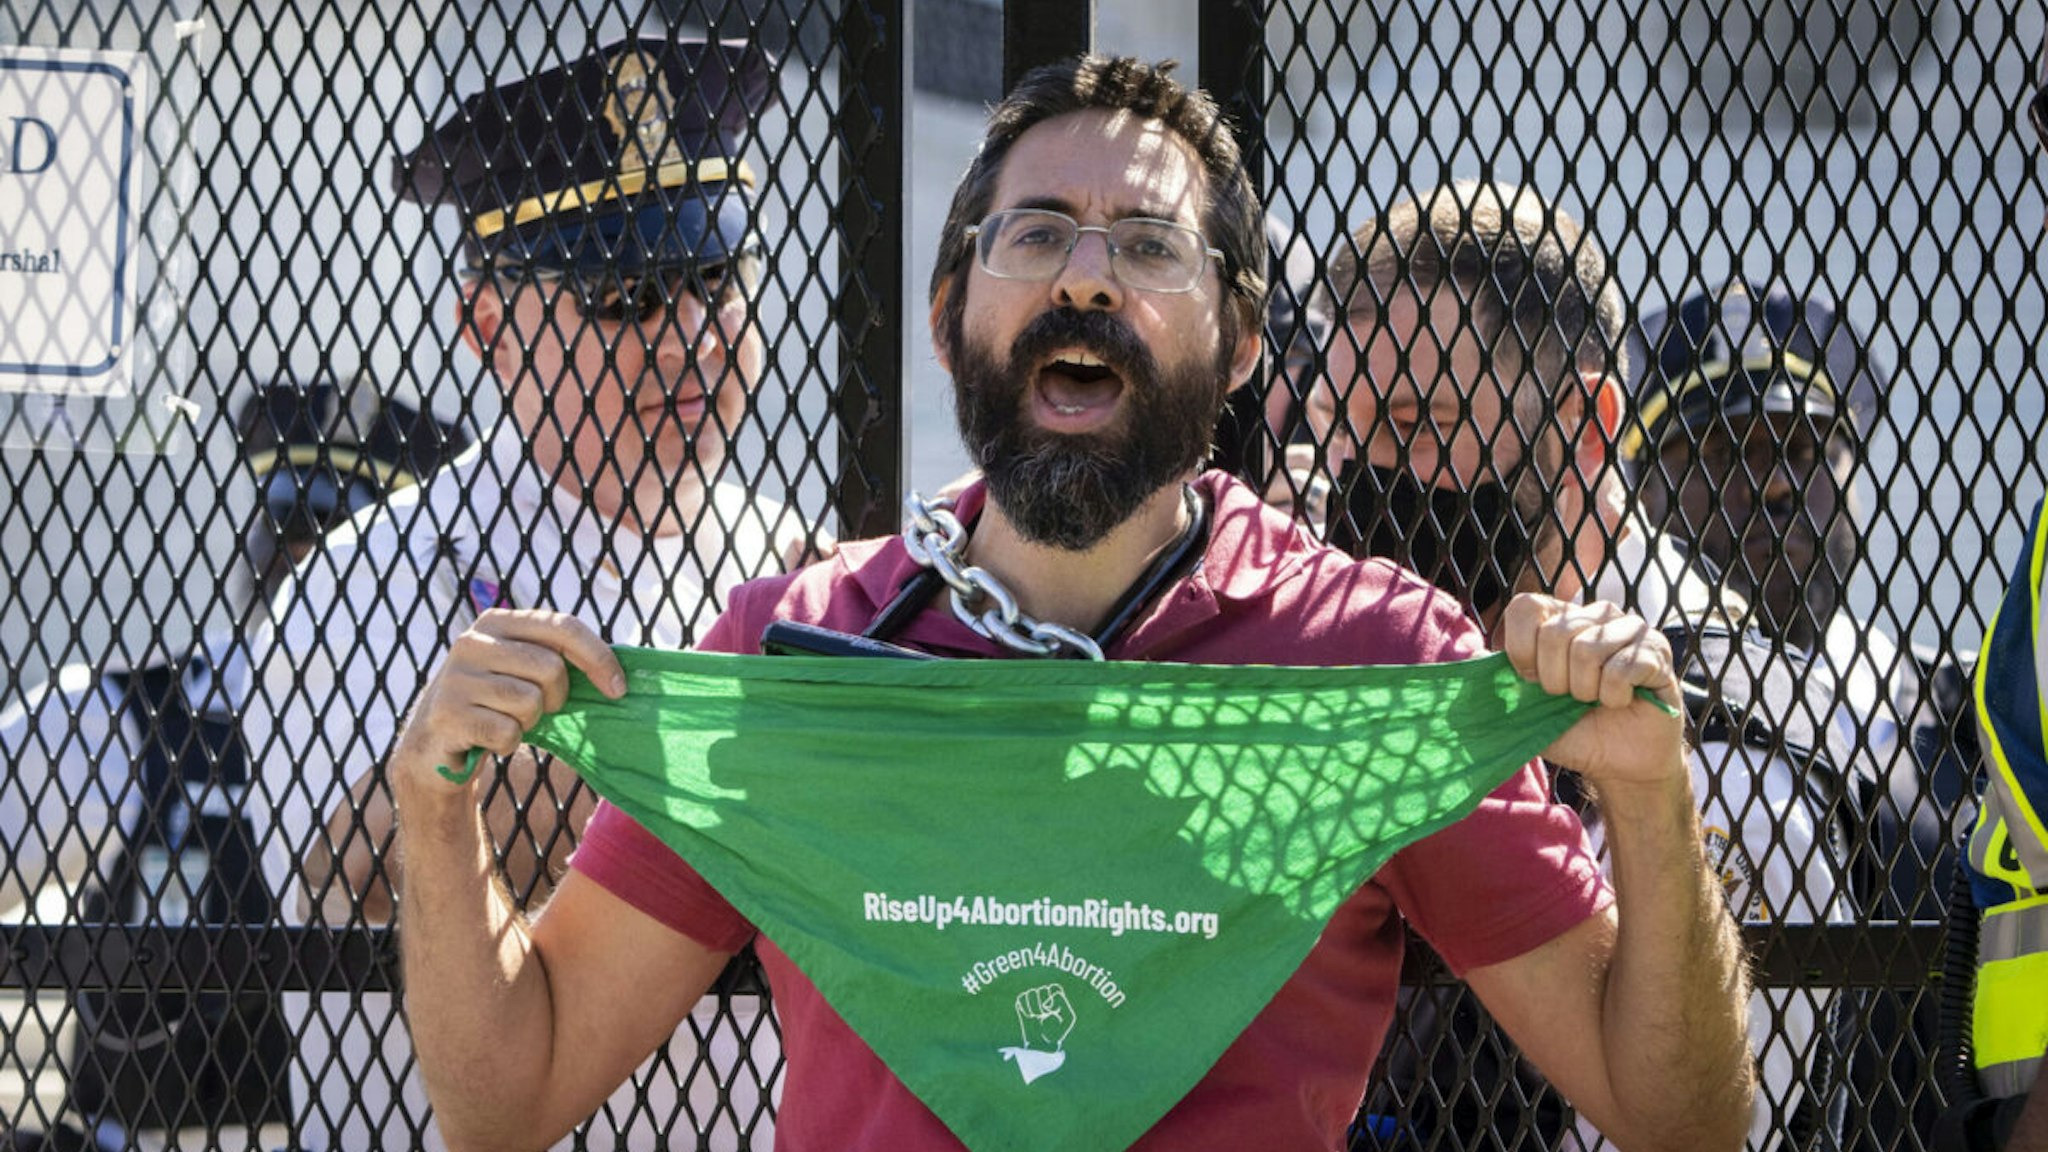 Abortion-rights activist Guido Reichstadter is confronted and detained by Supreme Court Police officers after chaining himself to a security fence in front of the U.S. Supreme Court on June 6, 2022 in Washington, DC.